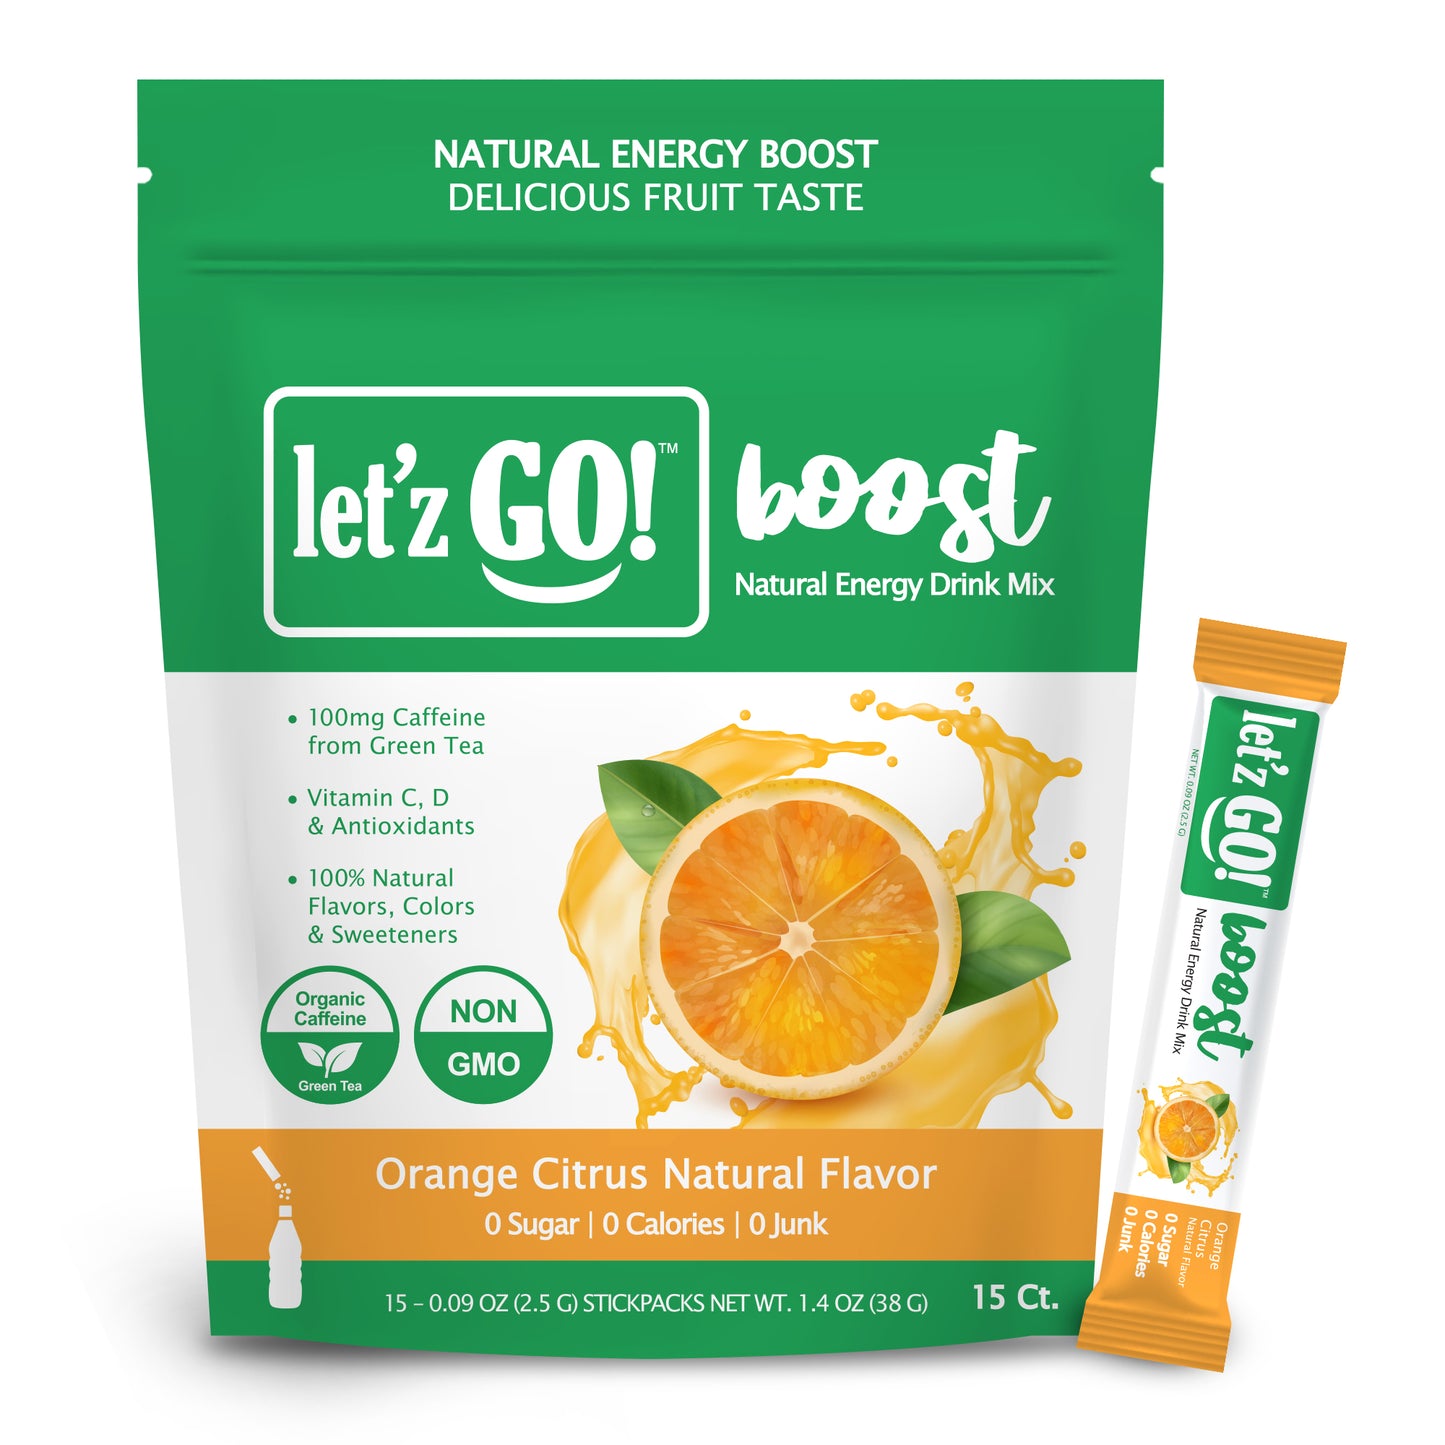 Let'z Go Boost - Orange Citrus - Natural Energy Drink Mix is all-natural, made with great-tasting fruit flavors, no calories, no sugar, and no artificial ingredients.